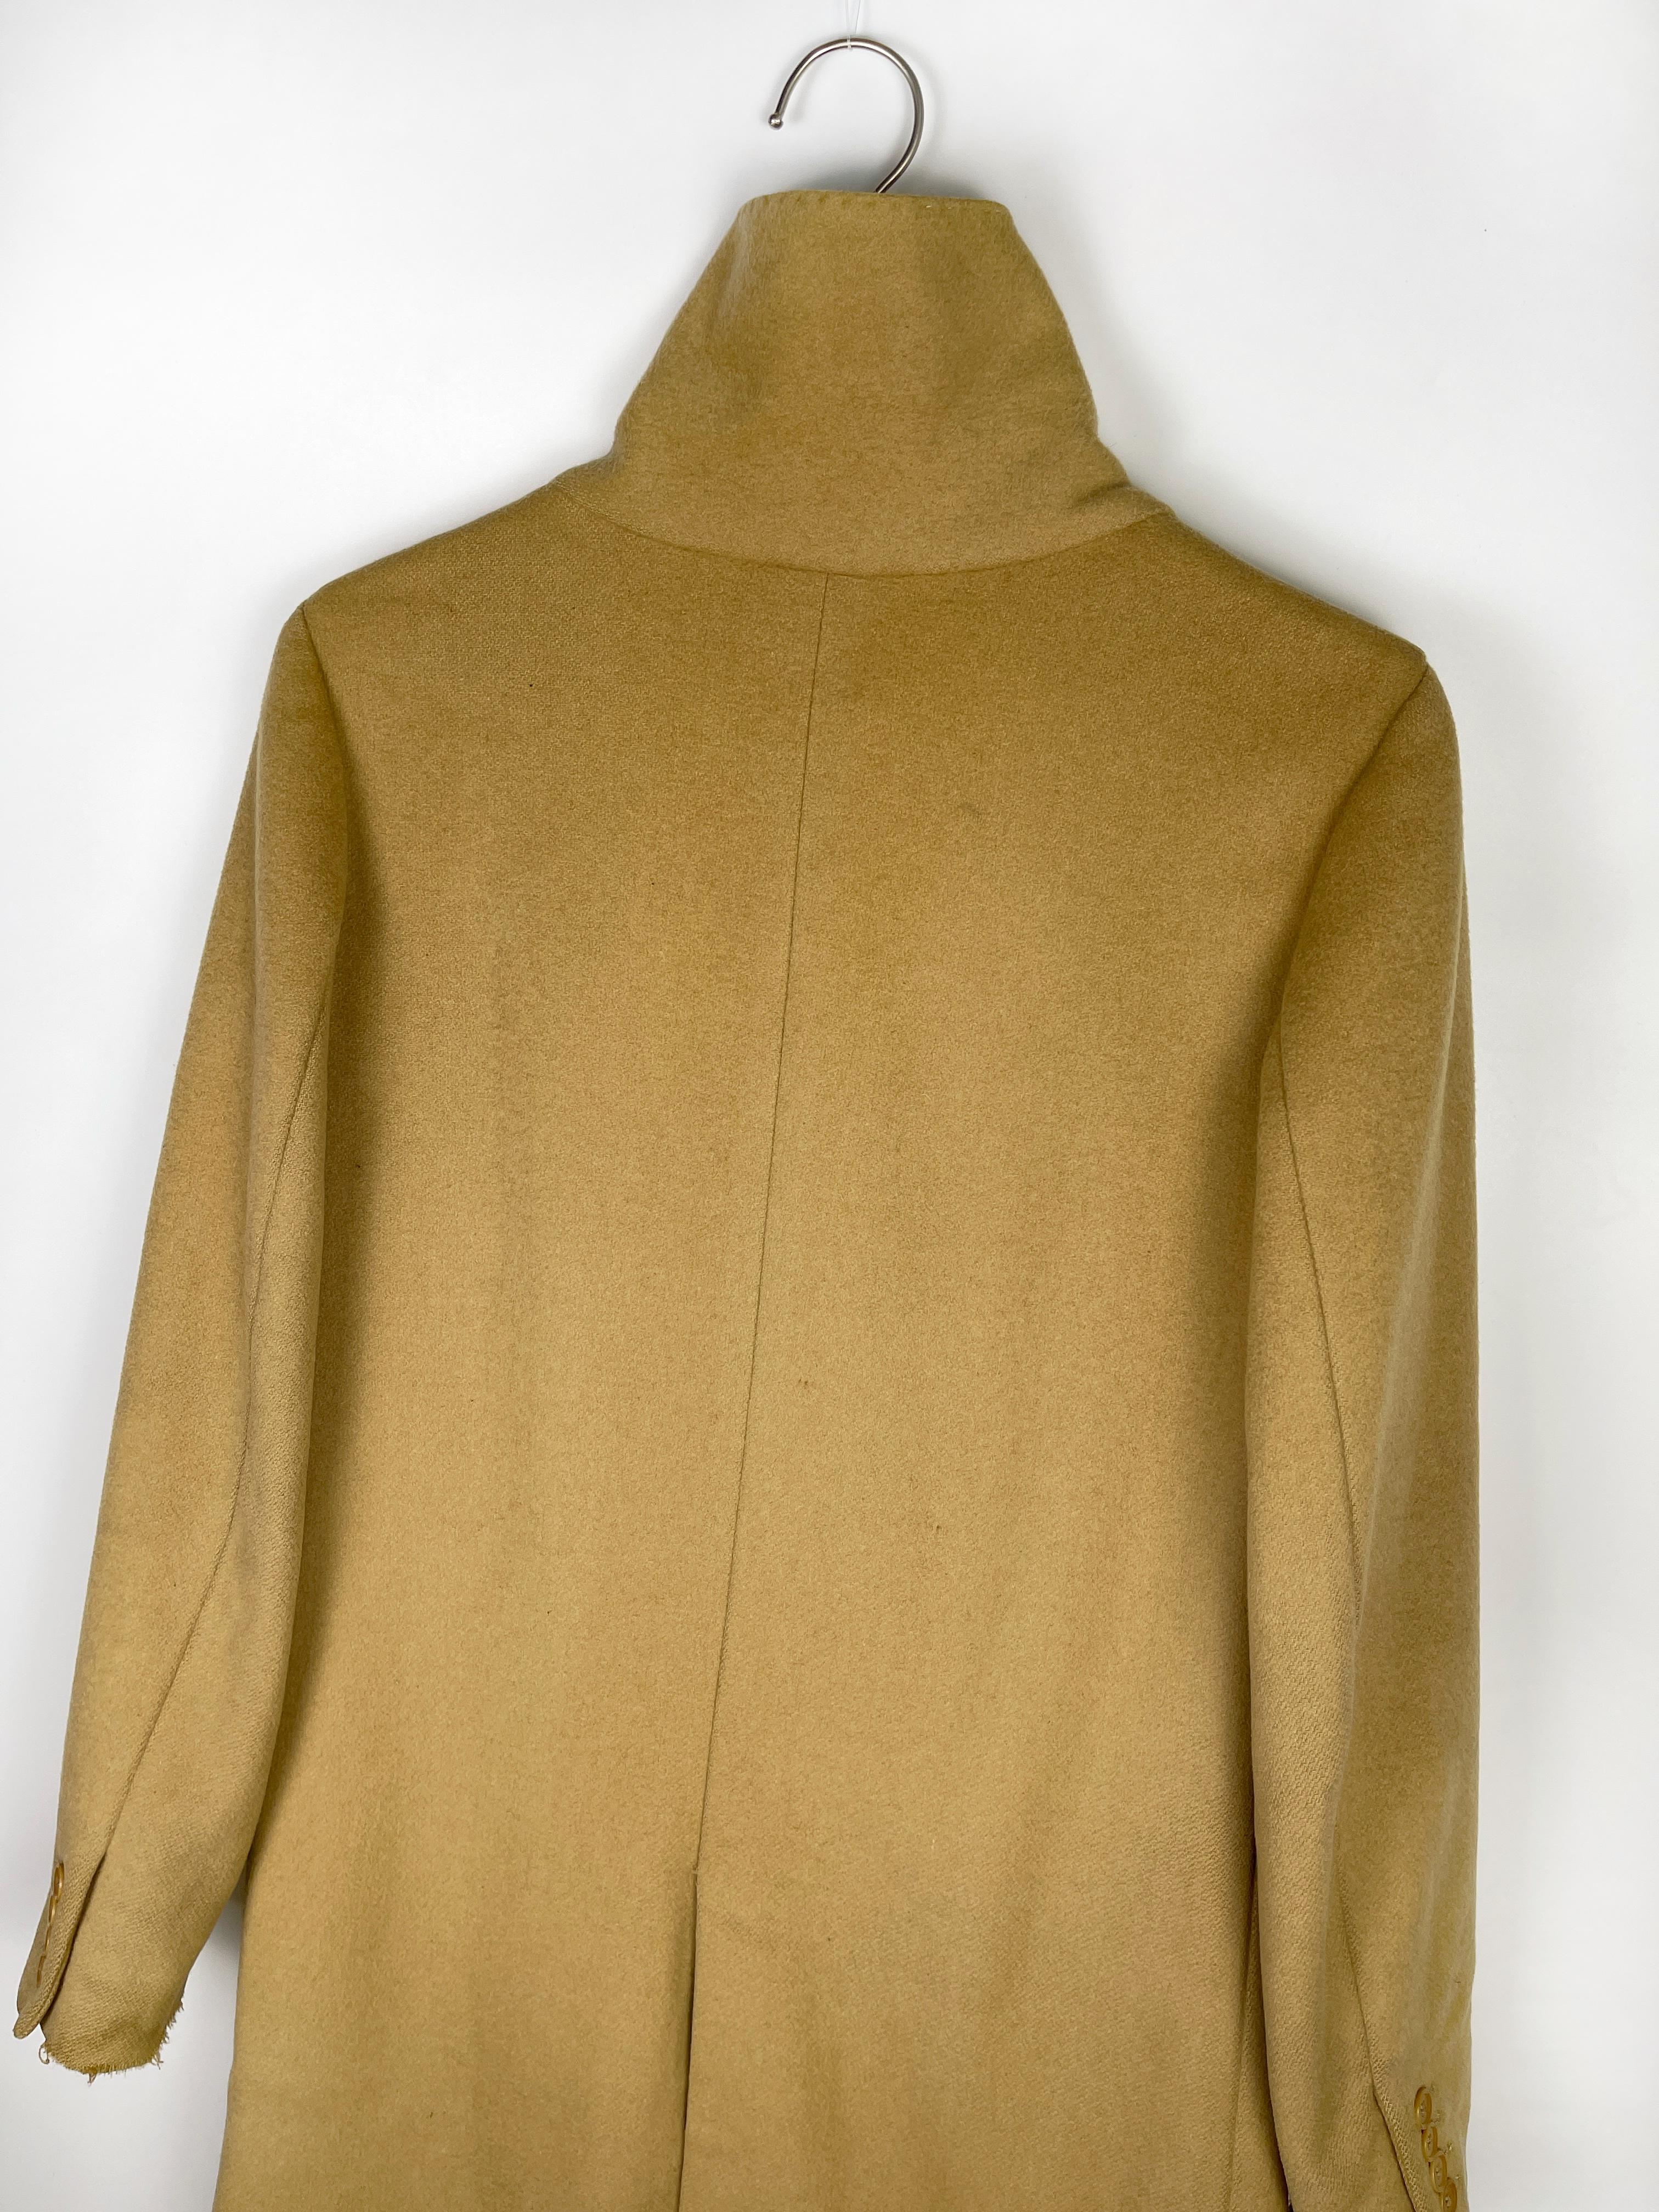 Vintage coat from Helmut Lang, the tag signified that the coat was produced in the 1980's. 

Size: Not listed, the item fits like a size Small or up to a slim Medium,

Condition: 7/10. There are scratches on the sleeve, and a sew spot on the